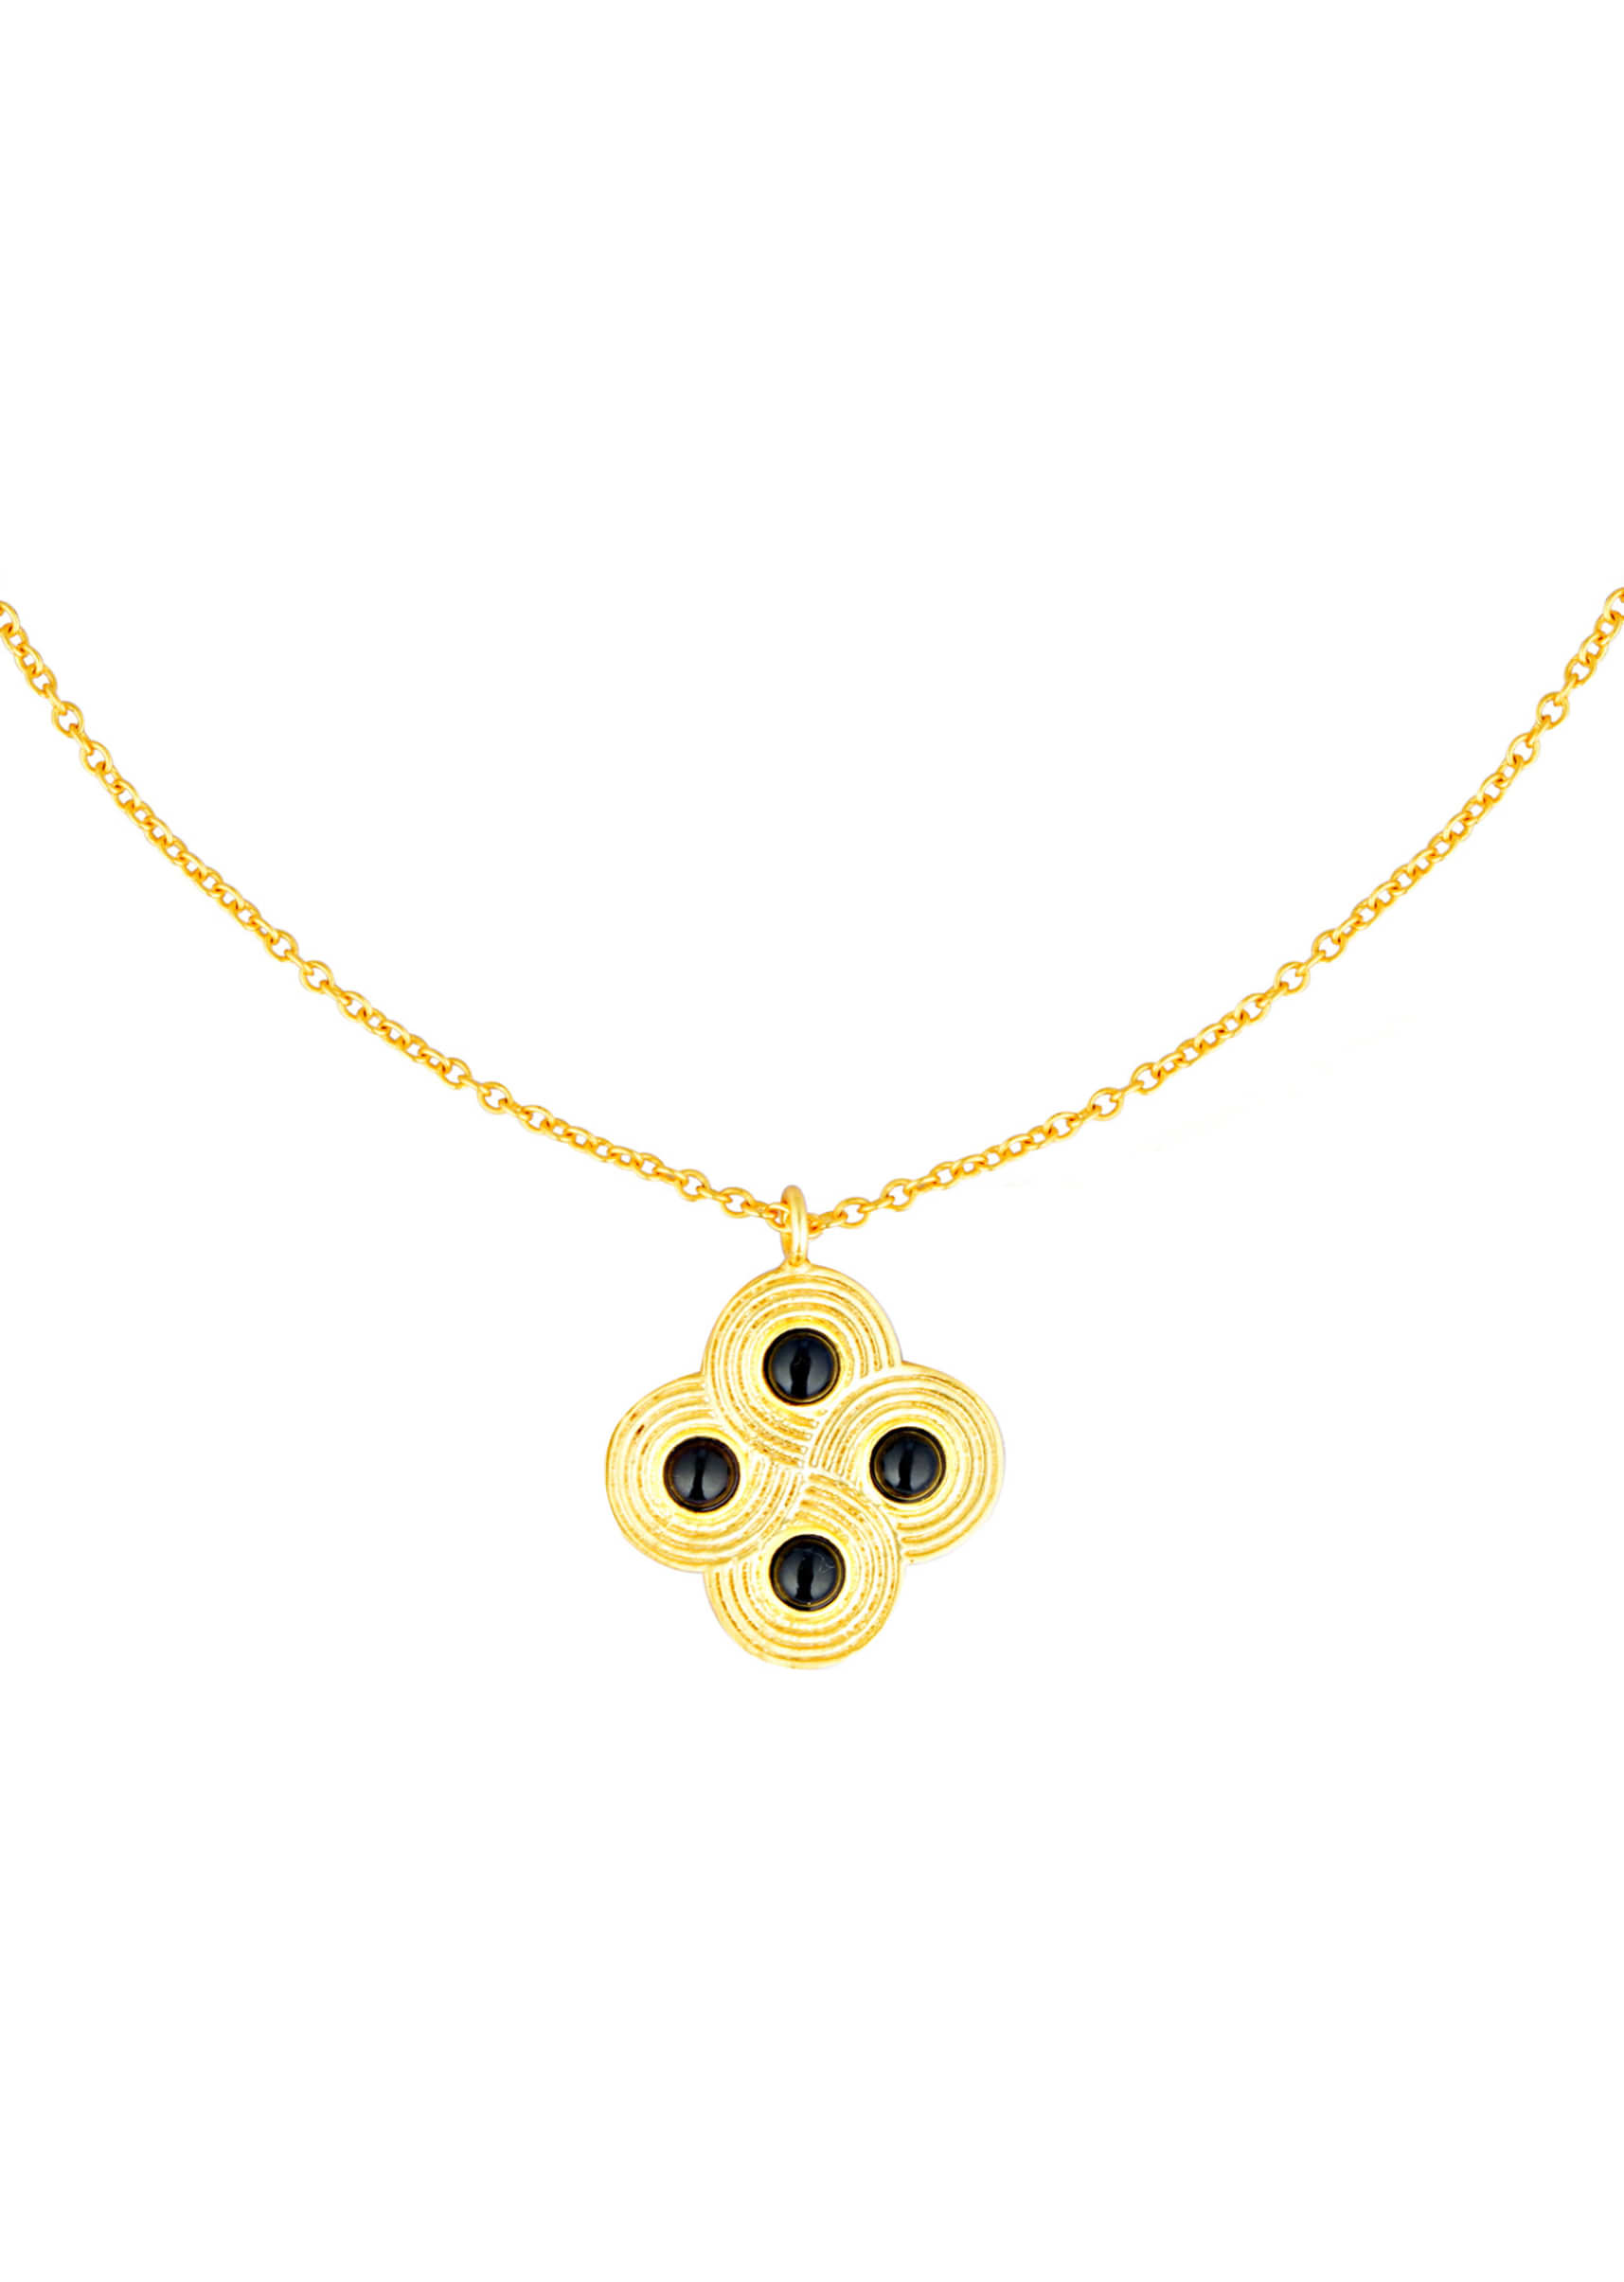 Gold Plated Necklace With A Pendant Studded With Onyx Stones